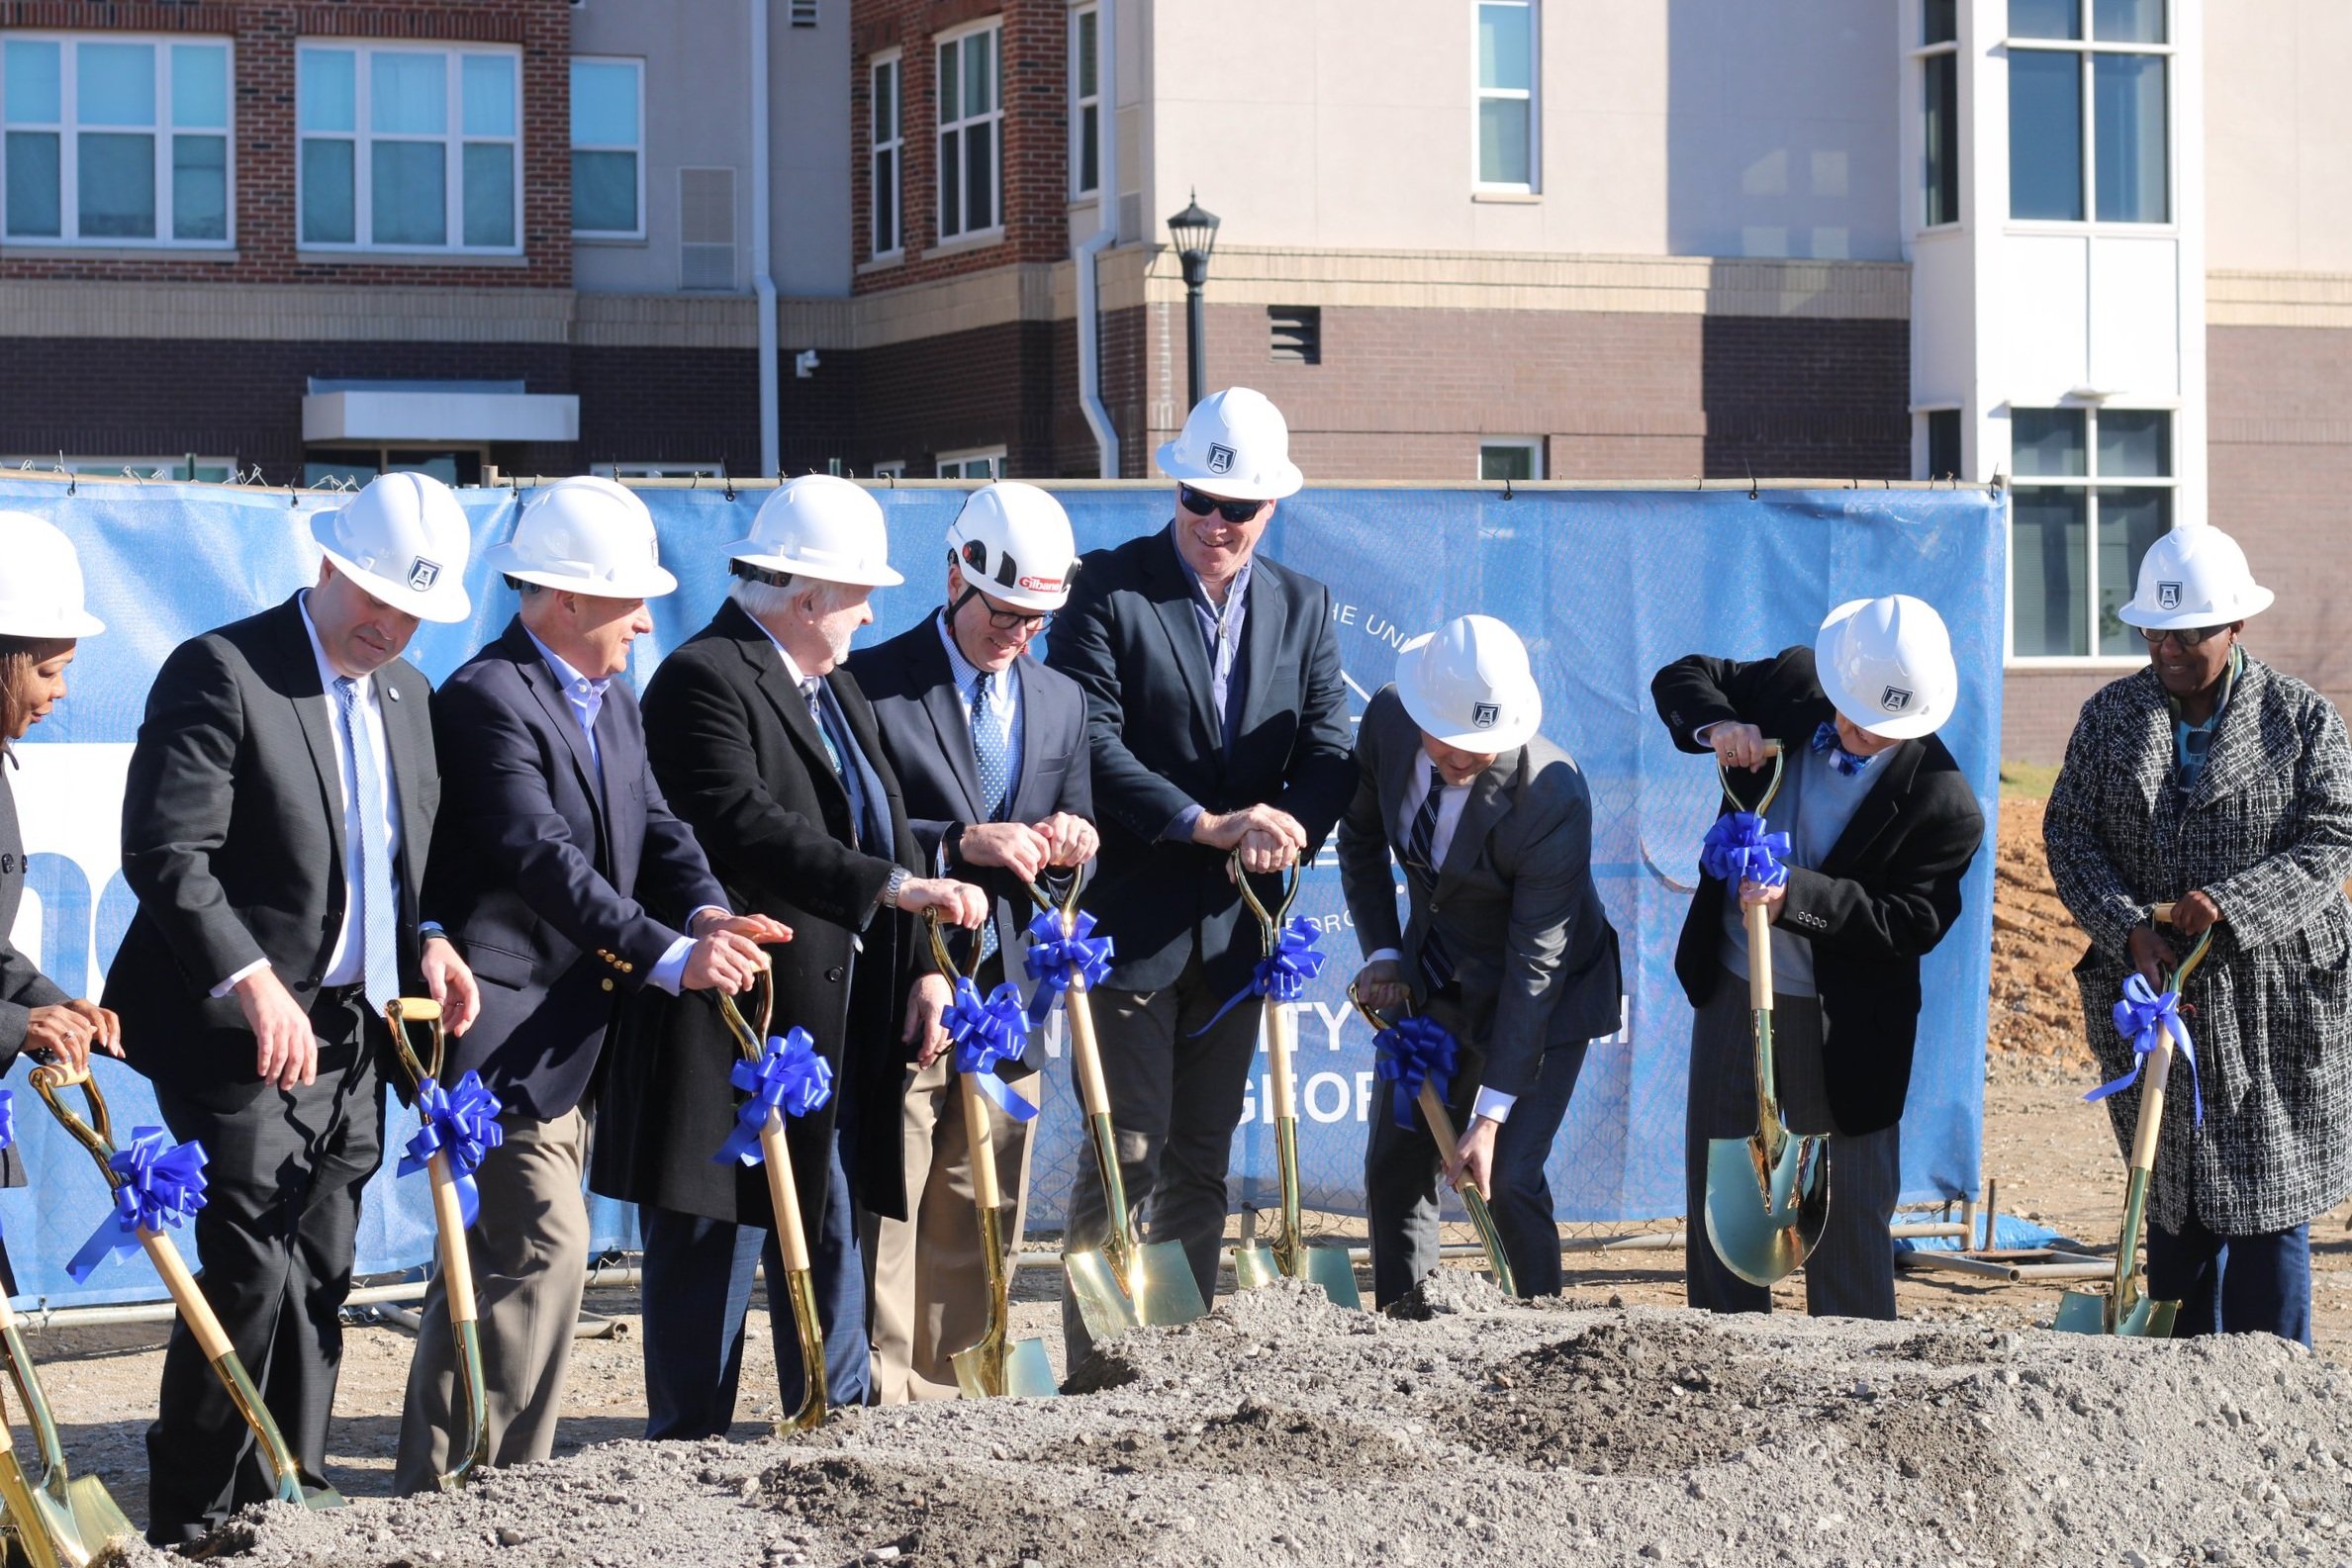  AU community in breaks ground for the new parking deck. 